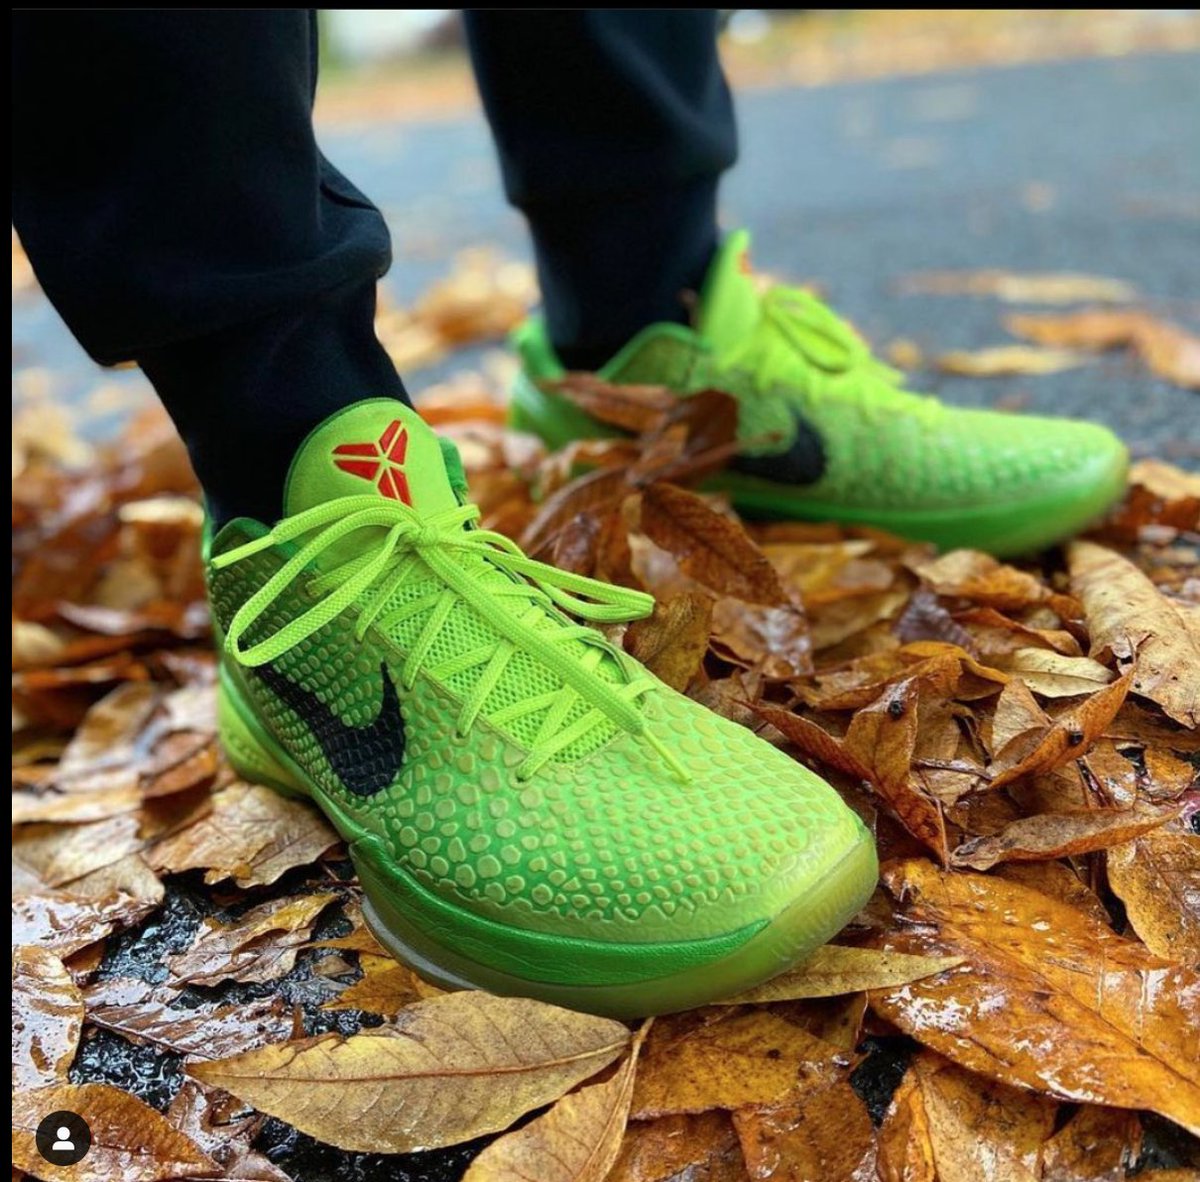 Esquiar plan navegador Sneaker Con on Twitter: "Nike is re-releasing on Christmas eve the popular  Kobe 6 Protro “Grinch” aka “The Gift” The re-release will stay as true to  the exclusive OG 2010. Drops on